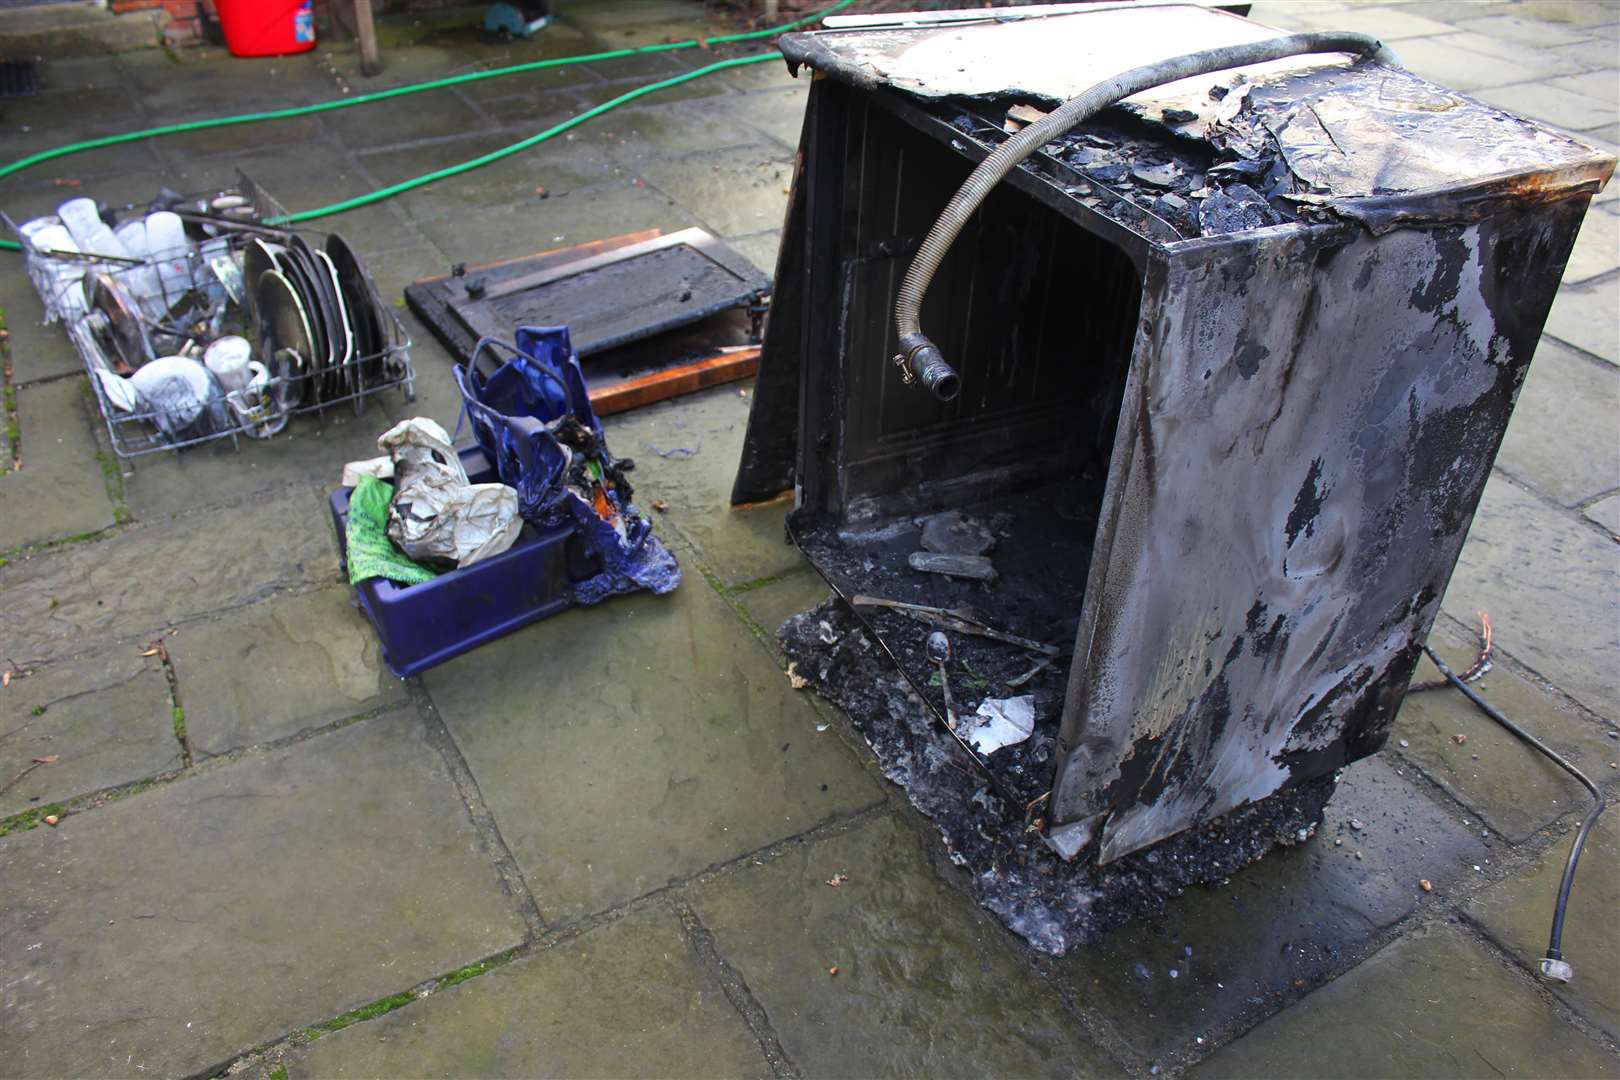 Extra precautions when using appliances have been encouraged following a dishwasher fire. Stock image